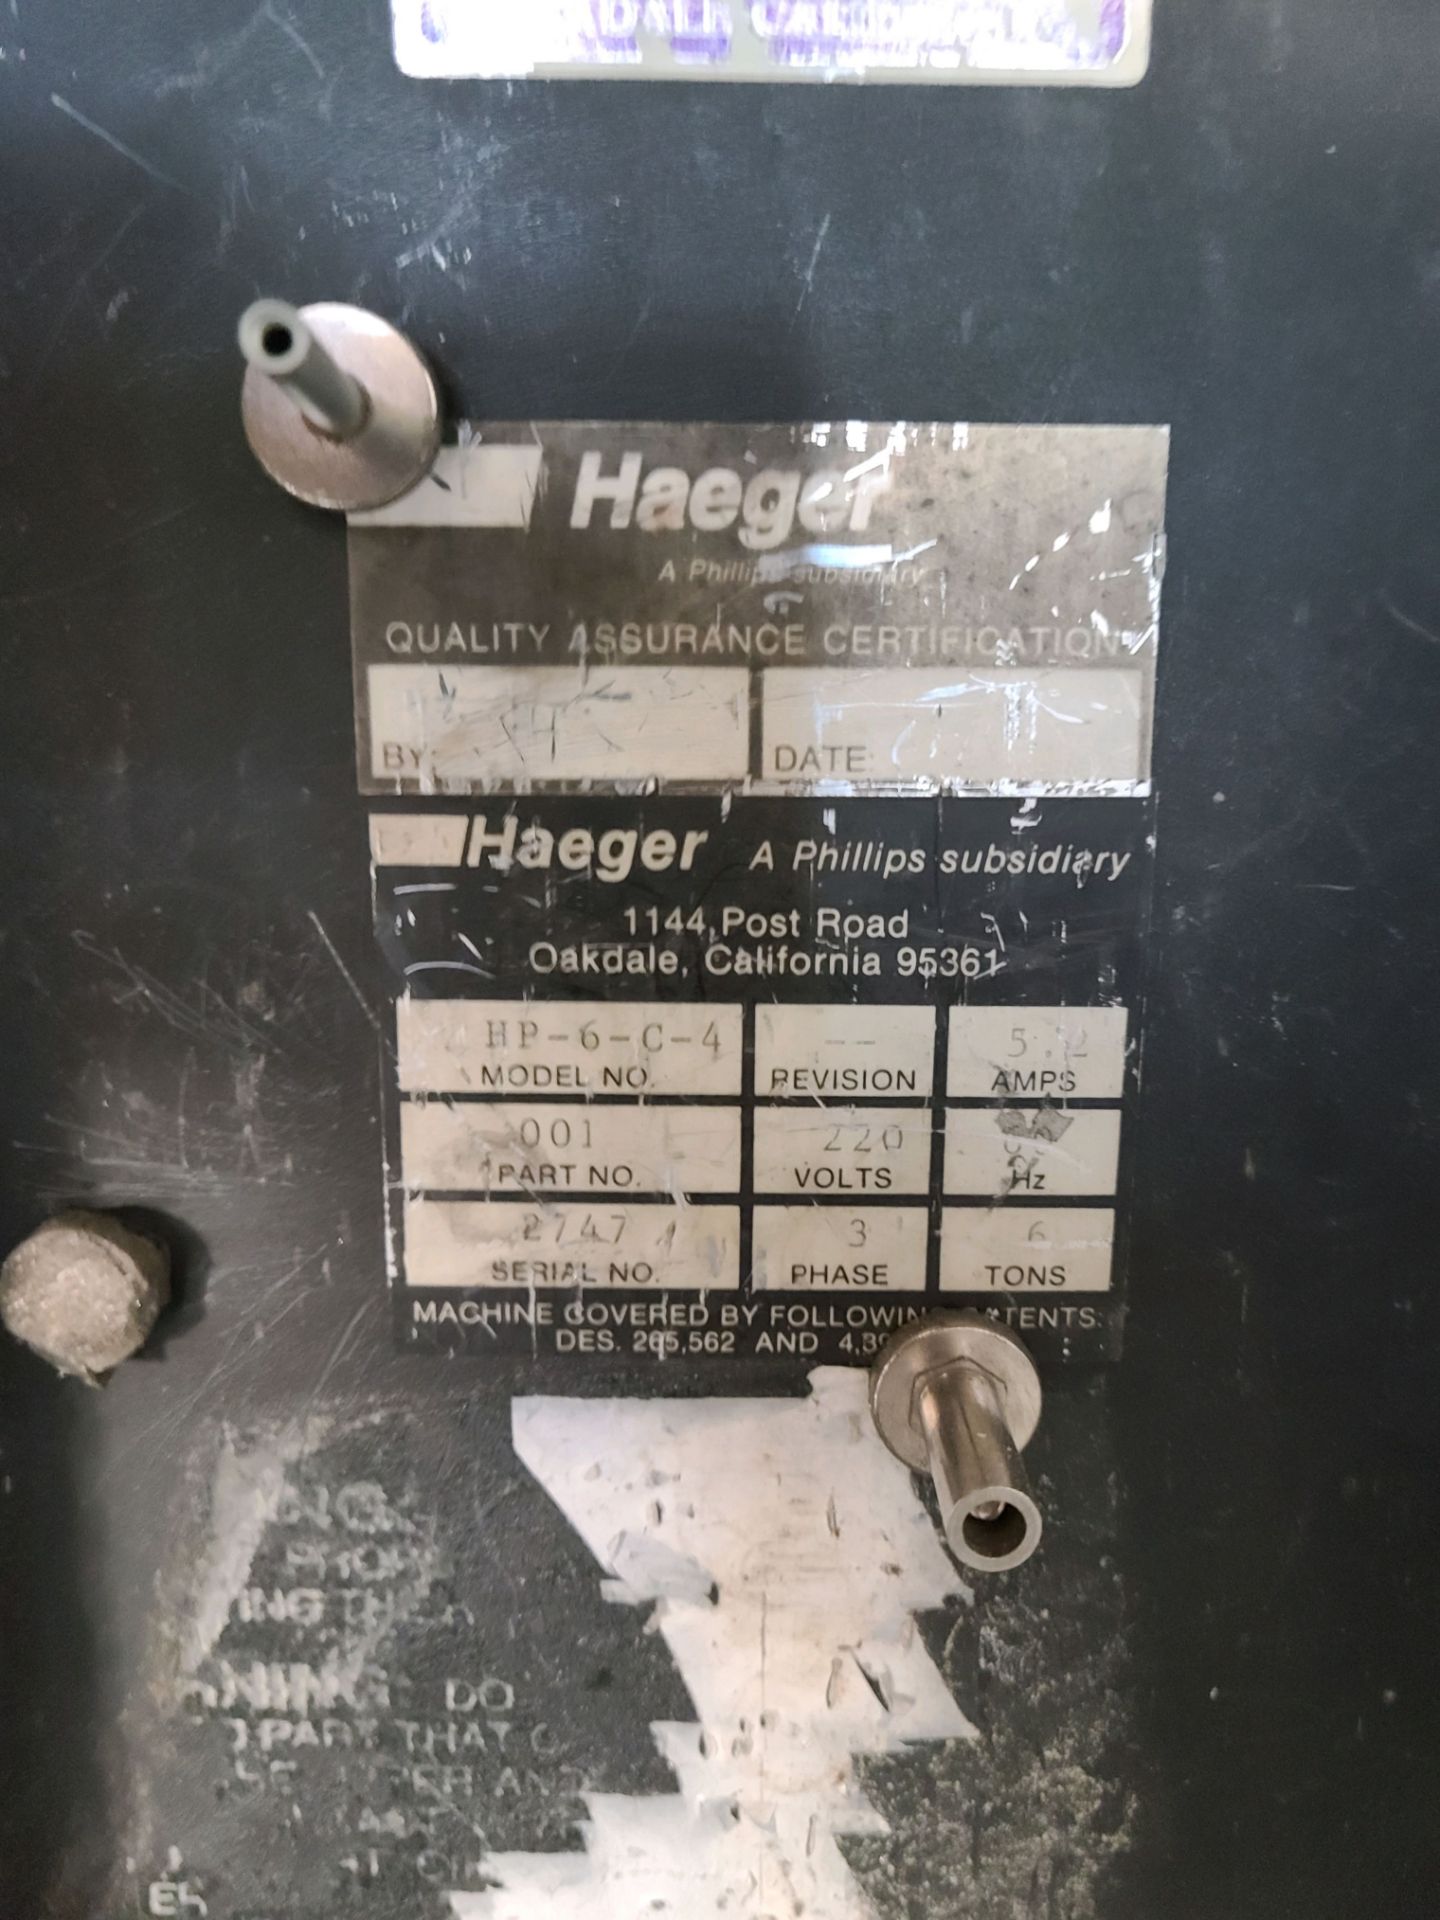 Haeger HP-6-C-4 Hardware Insertion Press s/n 2747 (SOLD AS-IS - NO WARRANTY) - Image 3 of 3